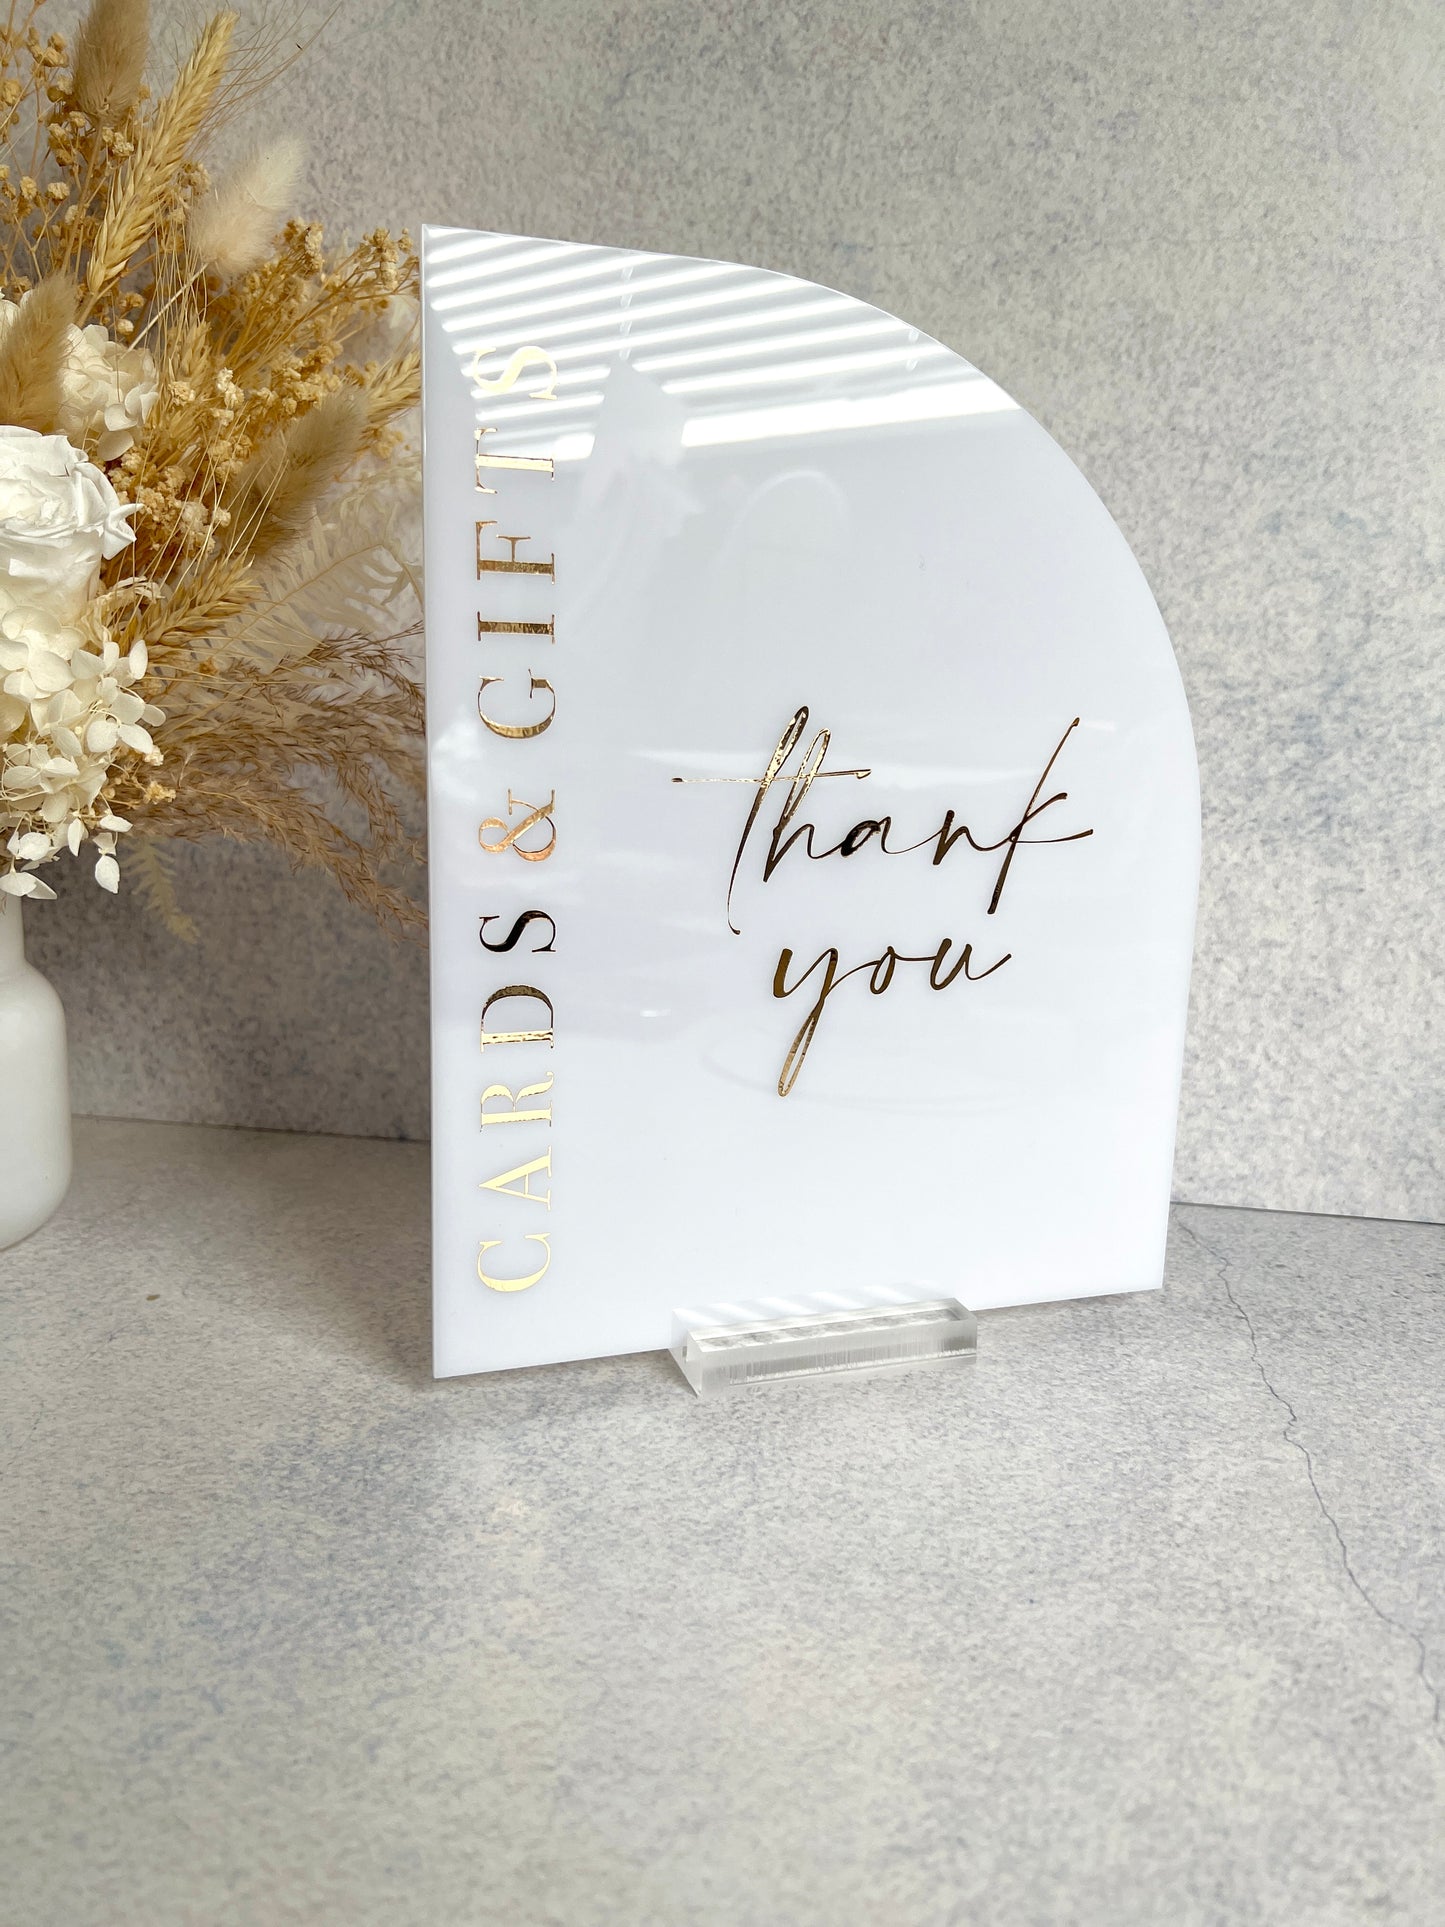 Half Arch Cards & Gifts Table Sign